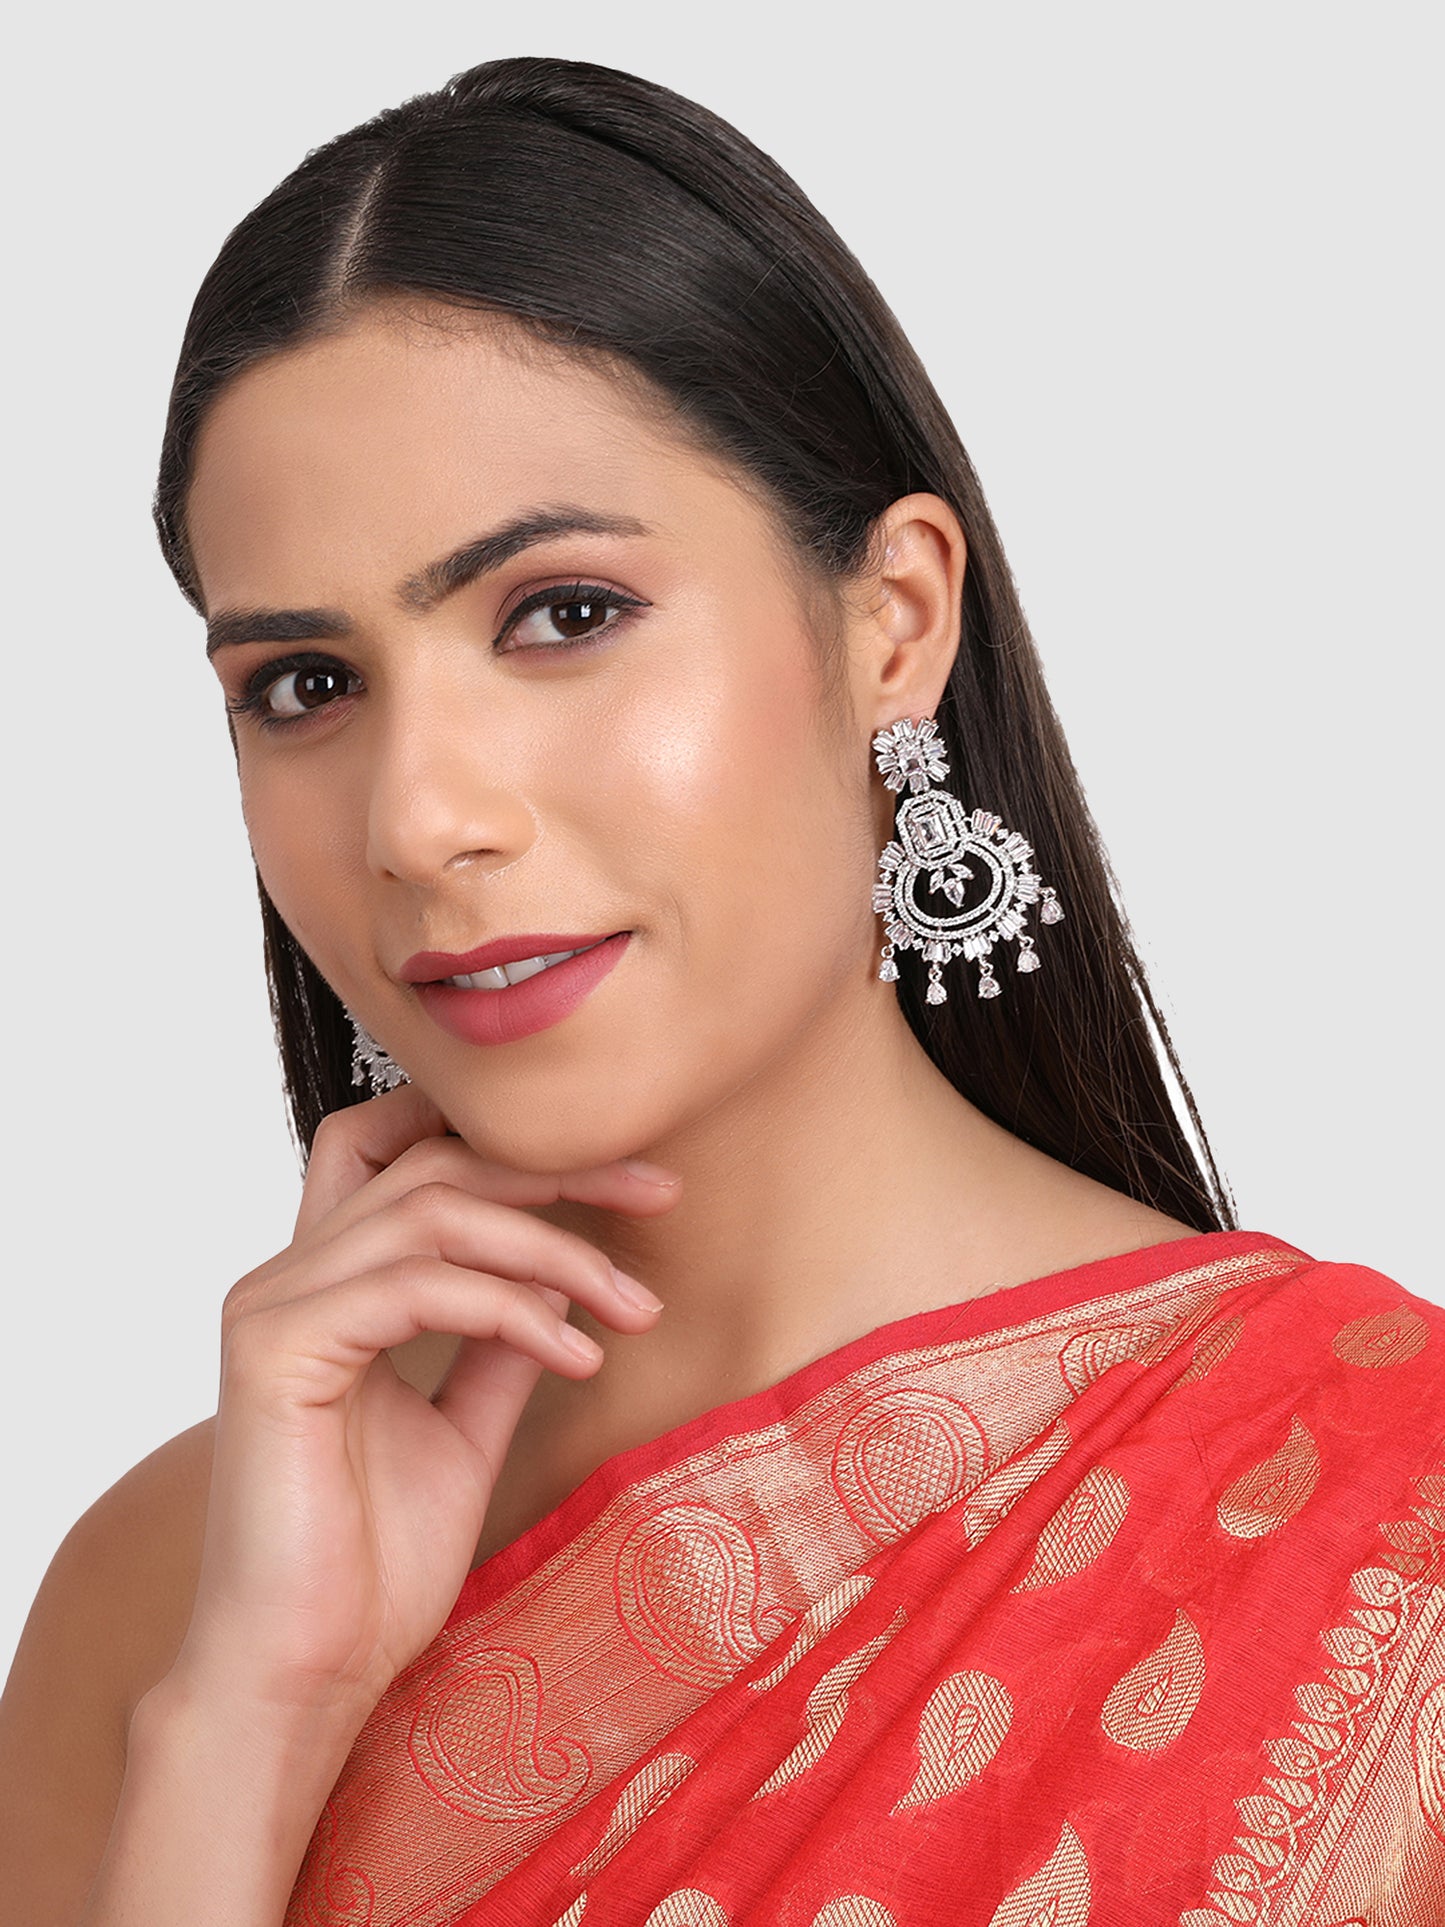 White & Silver Plated Quirky Chandbalis Earrings